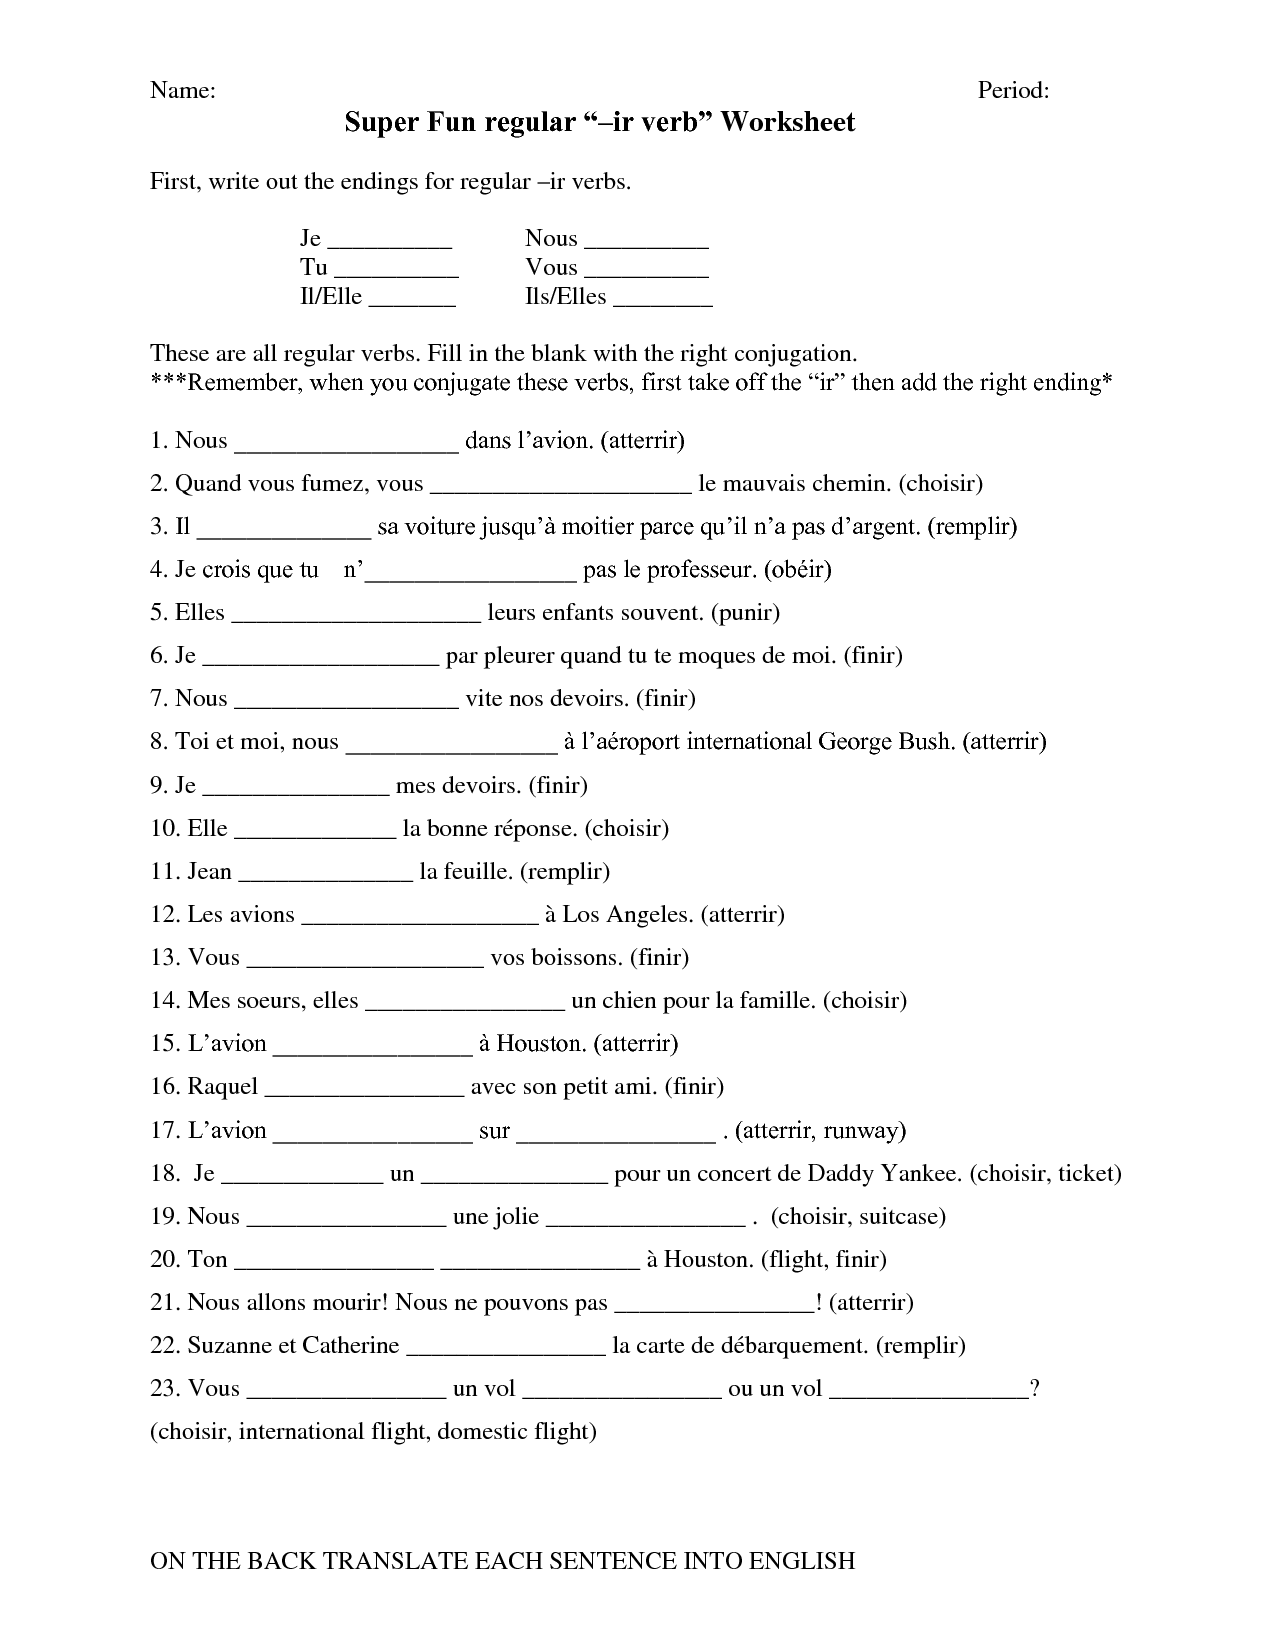 5-best-images-of-spanish-present-verb-conjugation-worksheet-spanish-verb-conjugation